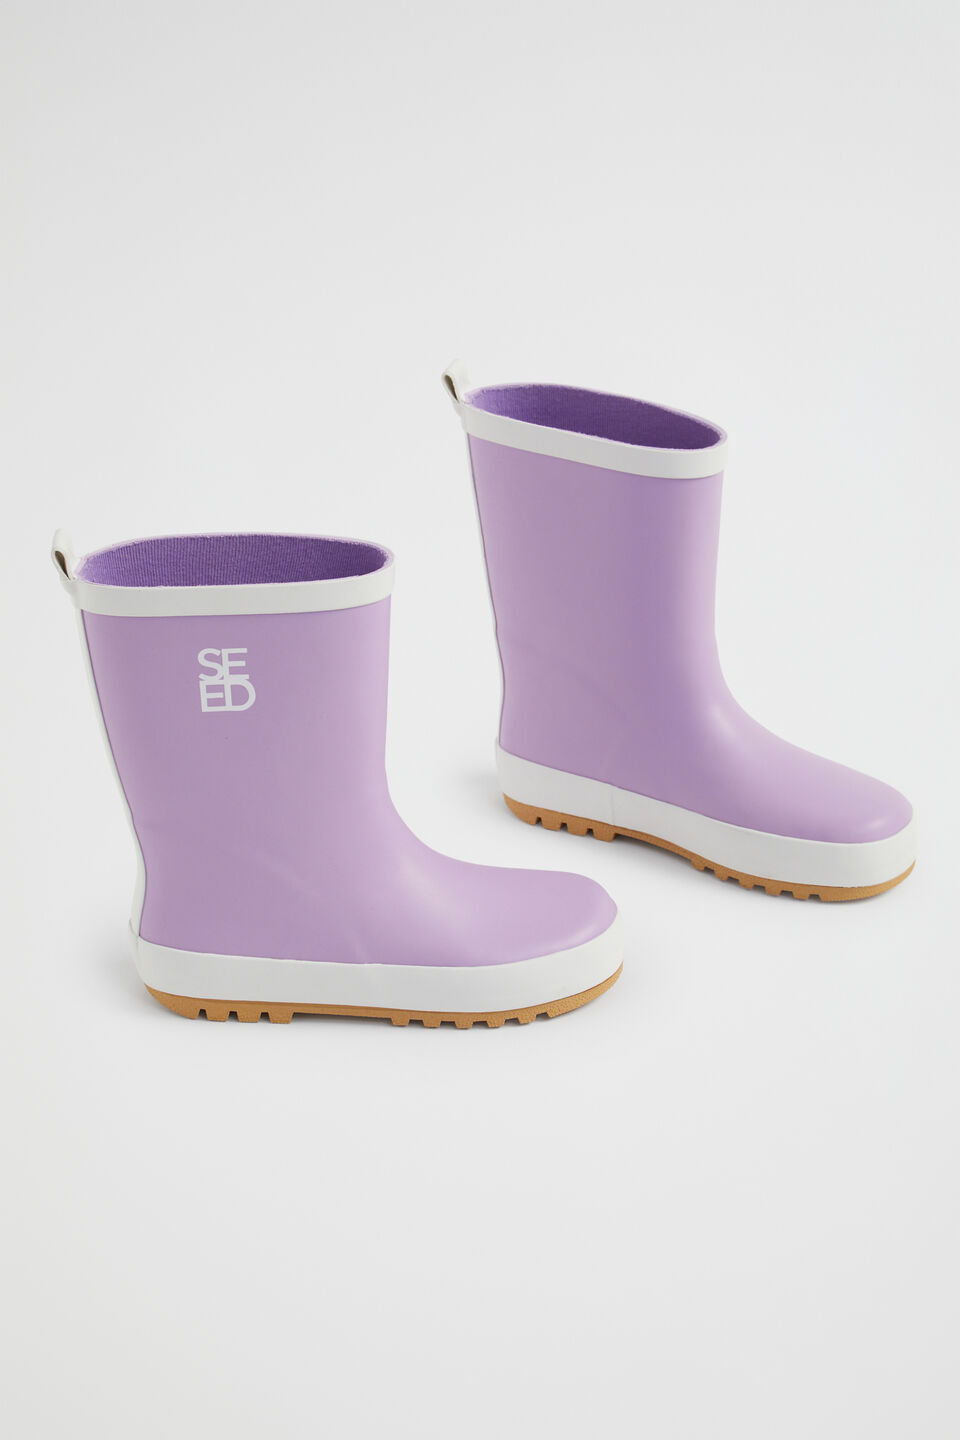 Seed Logo Rubber Gumboot  Lilac